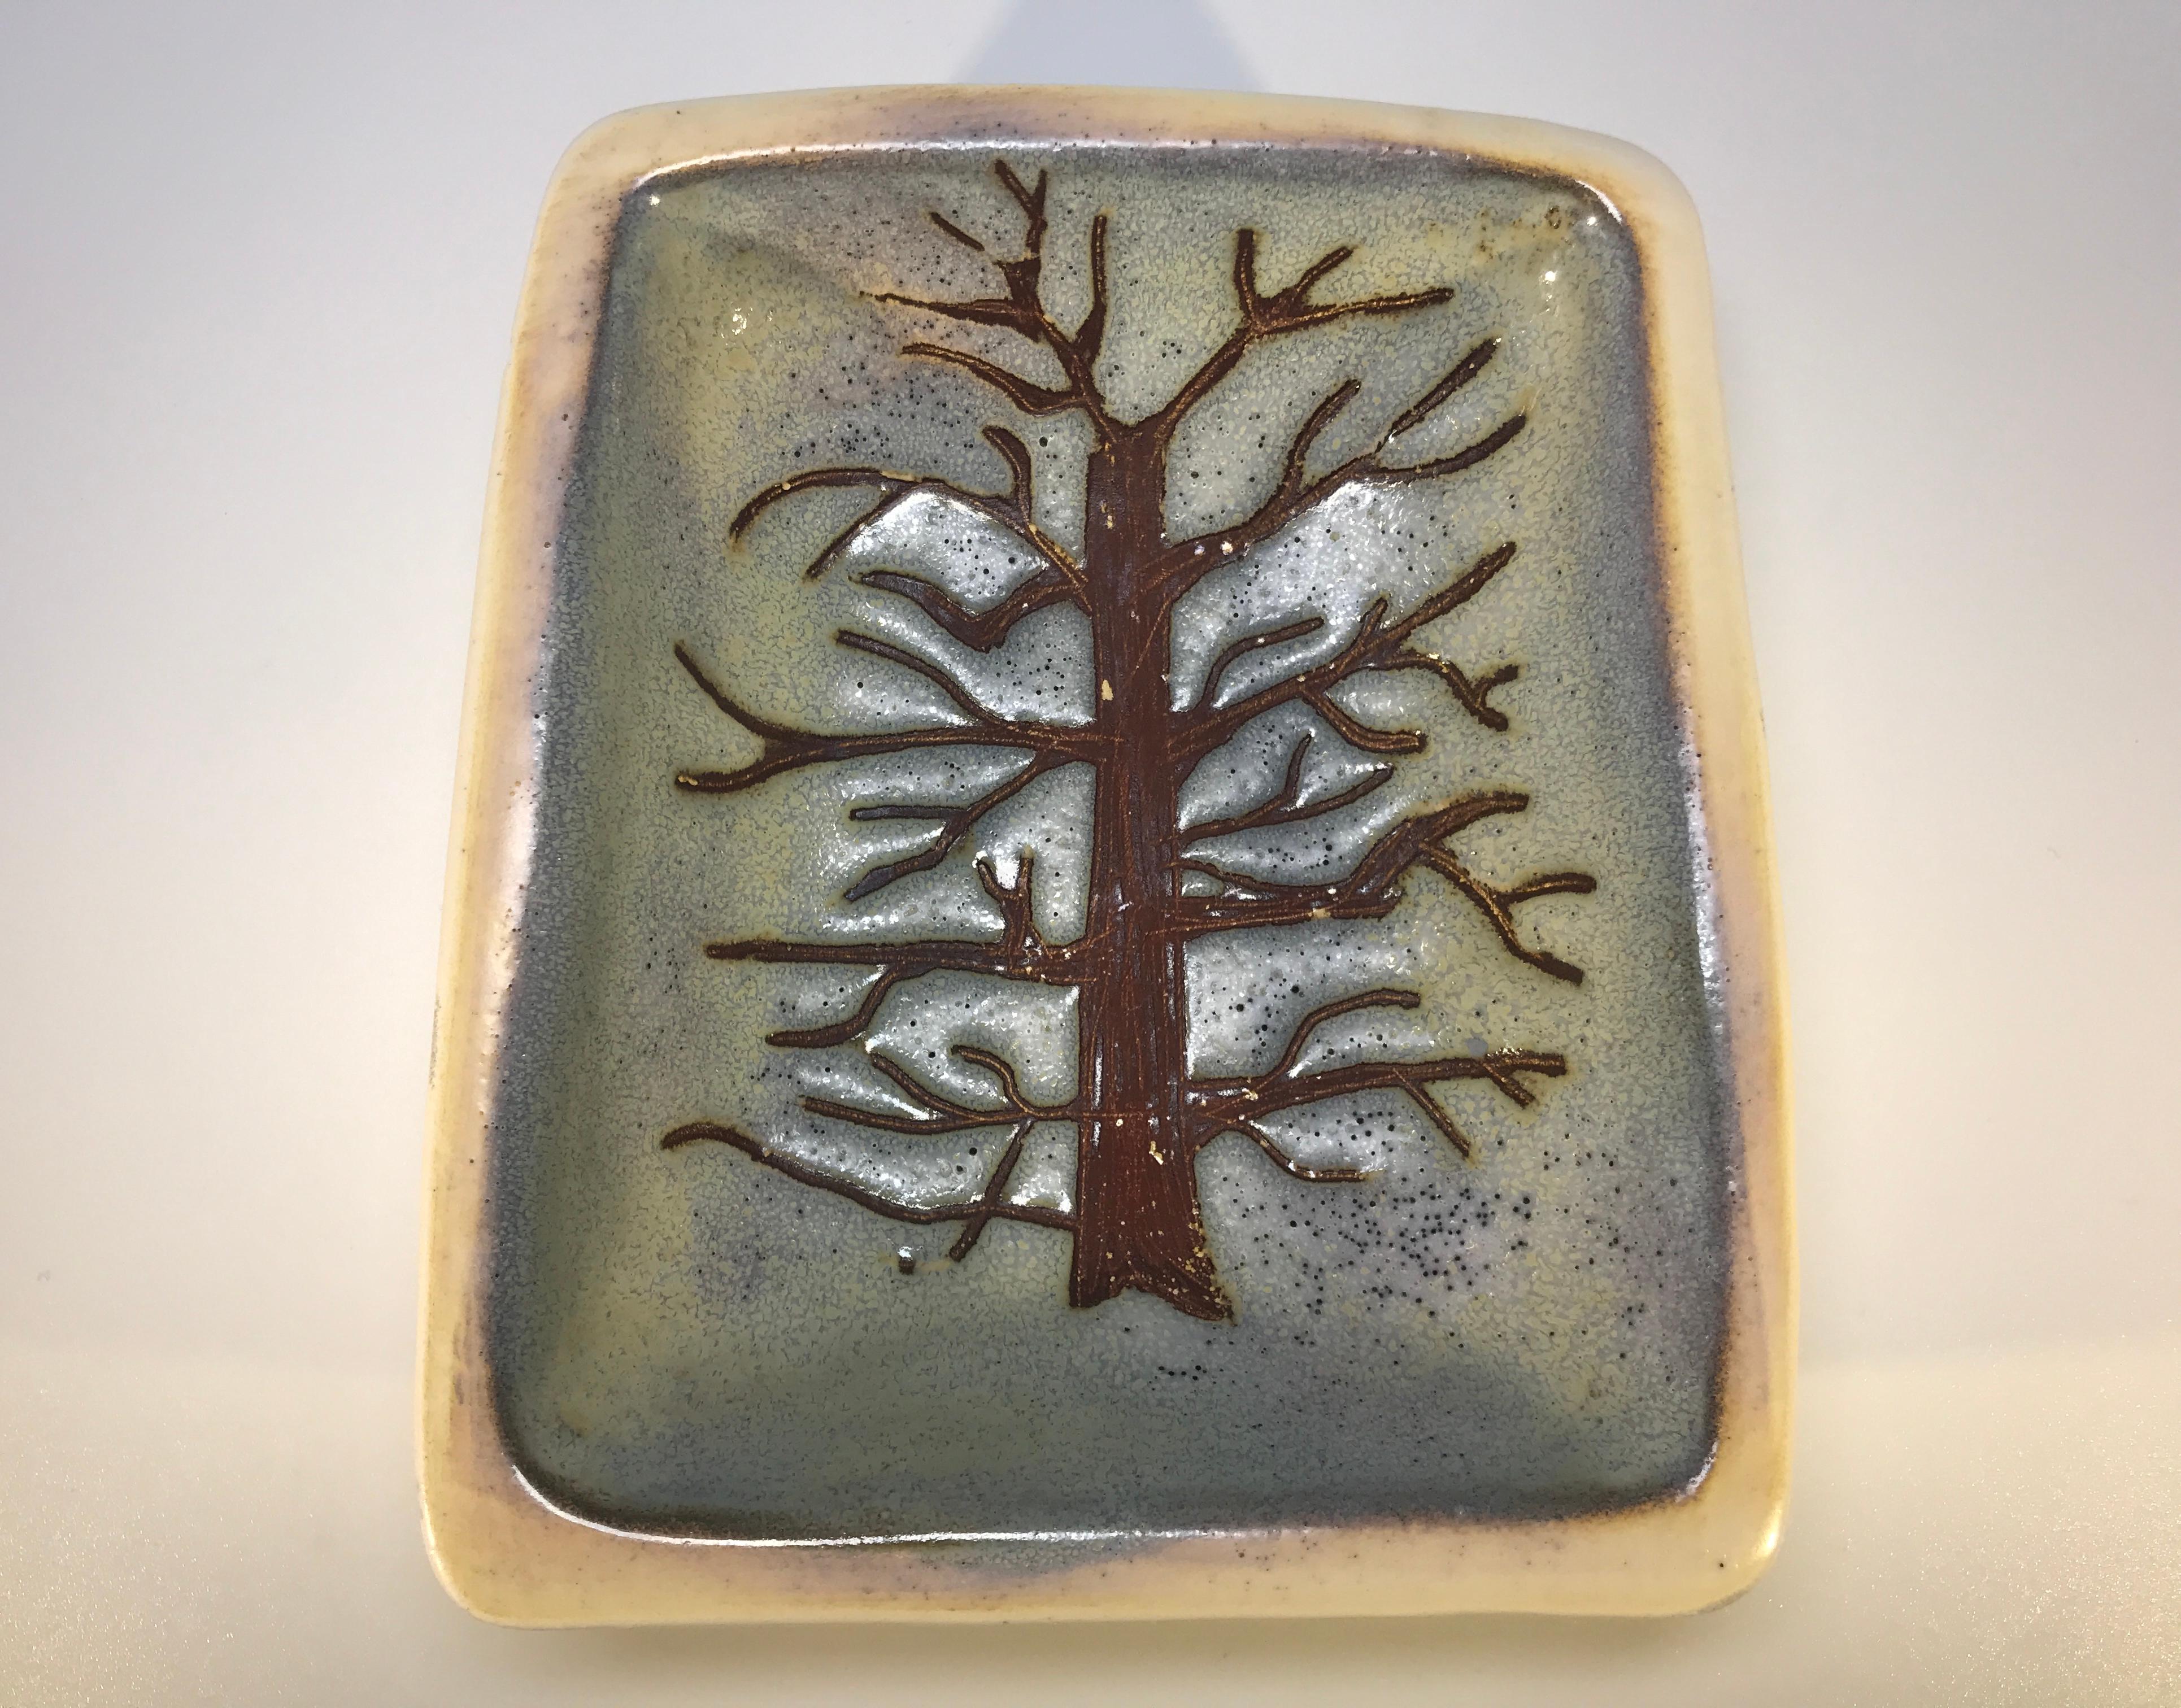 Ceramic Tree vidé poche from the studio of Les Argonautes for Vallauris, France.
Understated glaze technique exemplifies the art of Isabelle Ferlay and Frederique Bourguet,
circa 1950s
Signed Les Argonautes, Vallauris to base
Measures: Height